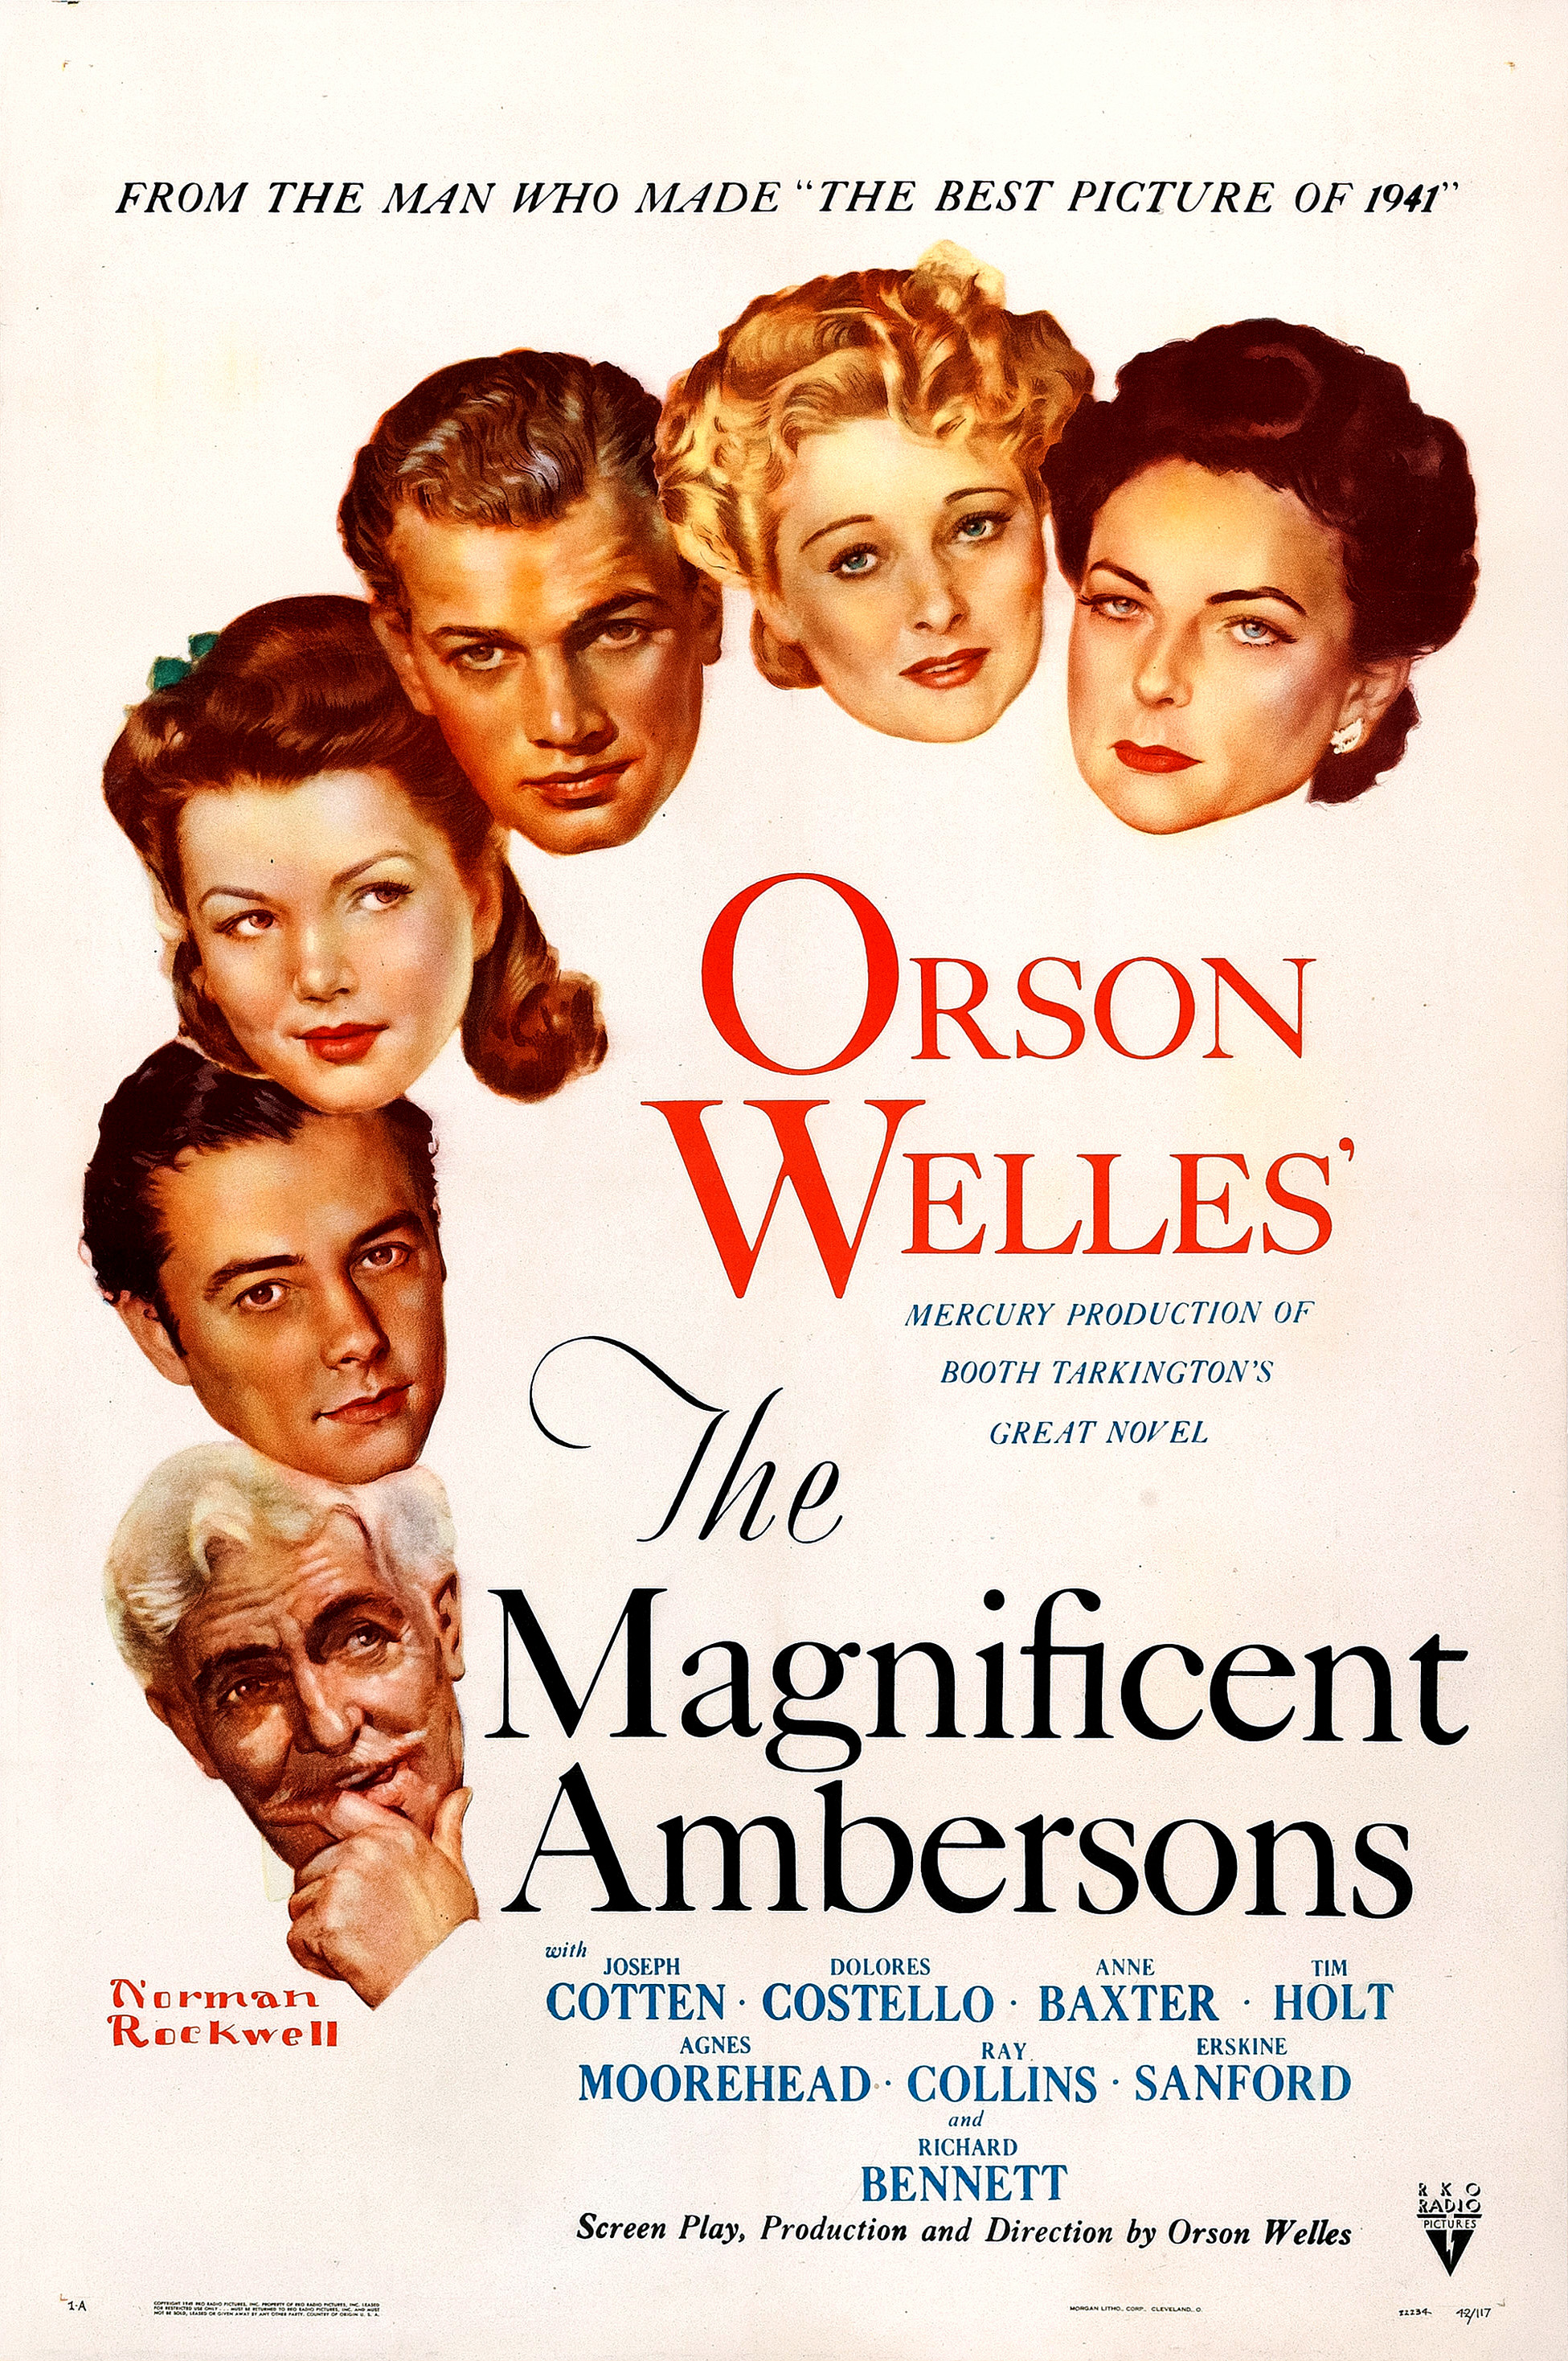 The Magnificent Ambersons (film) - Wikipedia